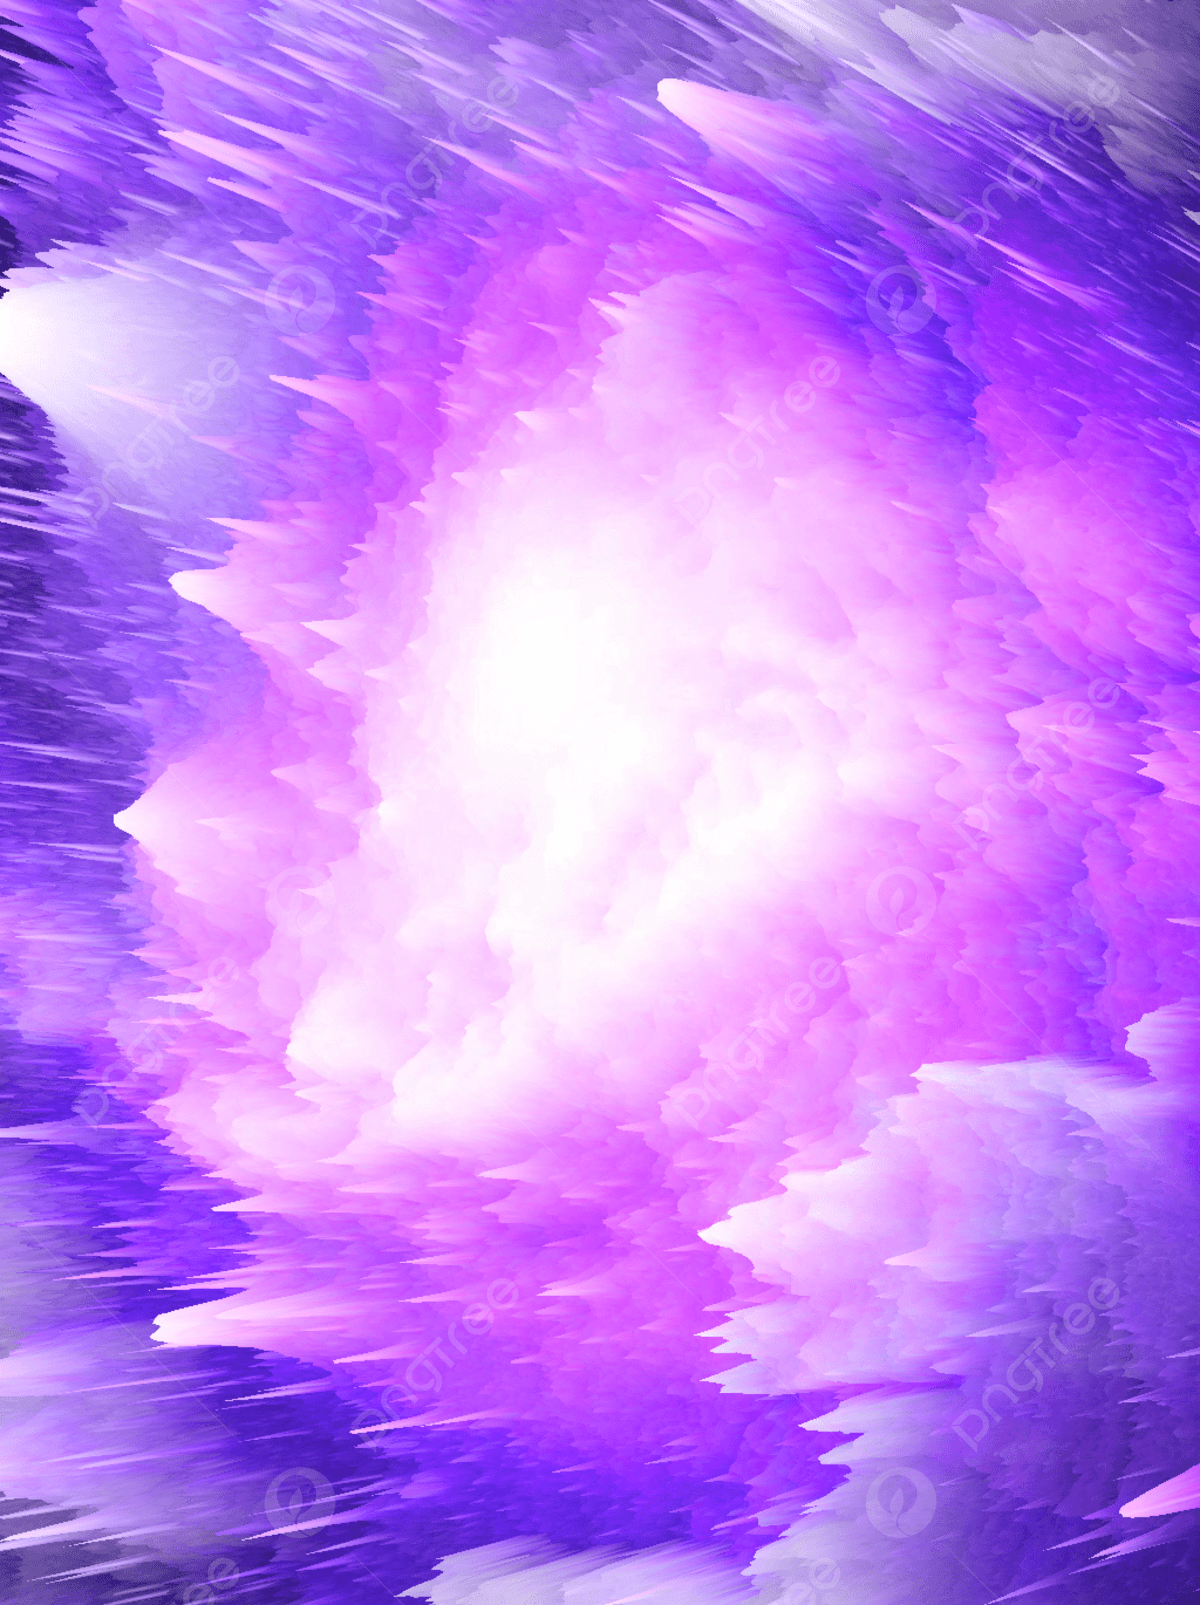 A pink and purple fractal image with a star burst effect - 3D